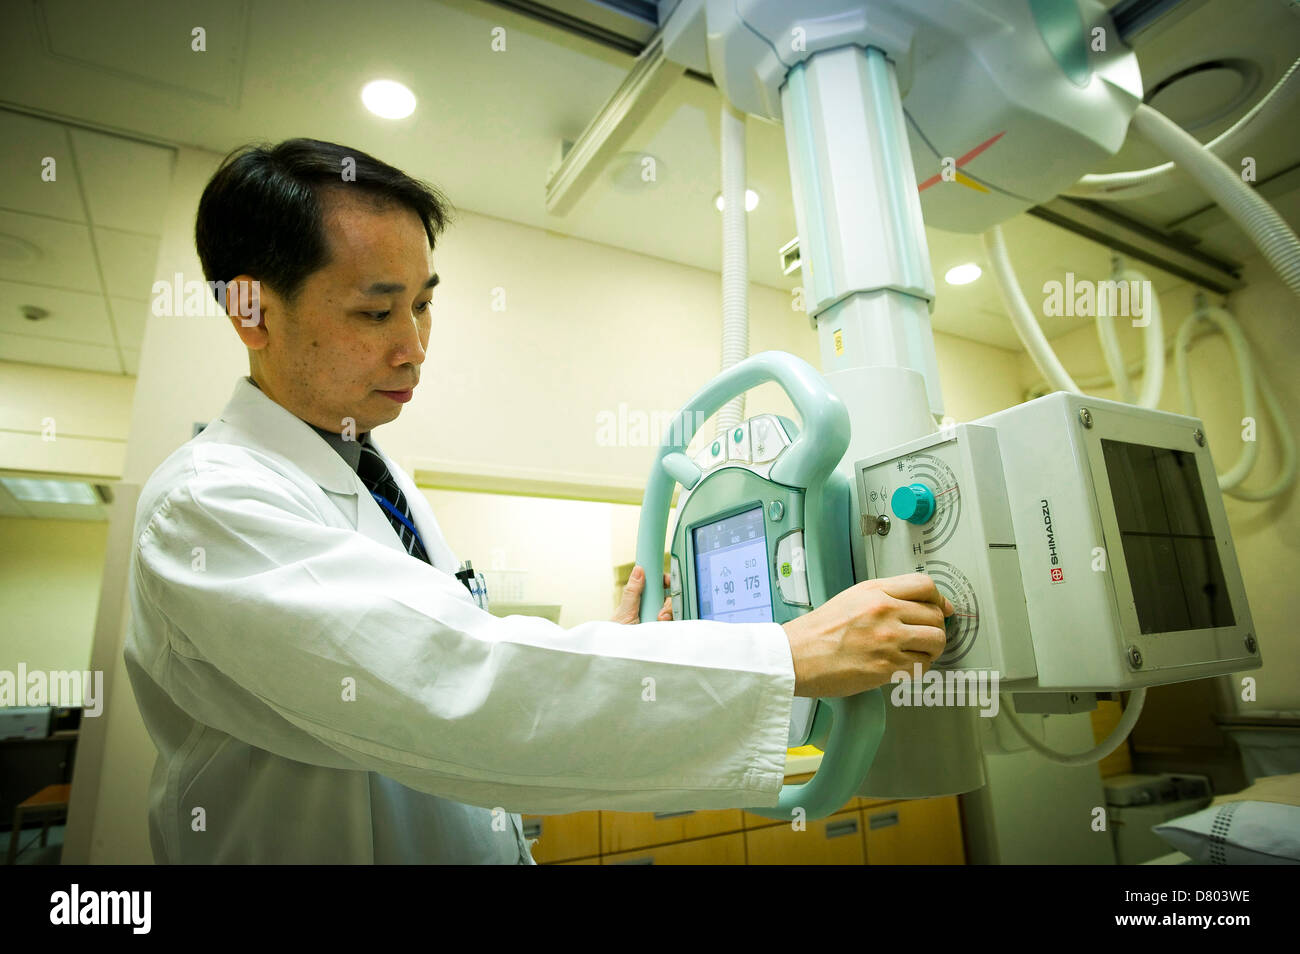 A radiologist adjusts an X-ray machine prior to use. Stock Photo